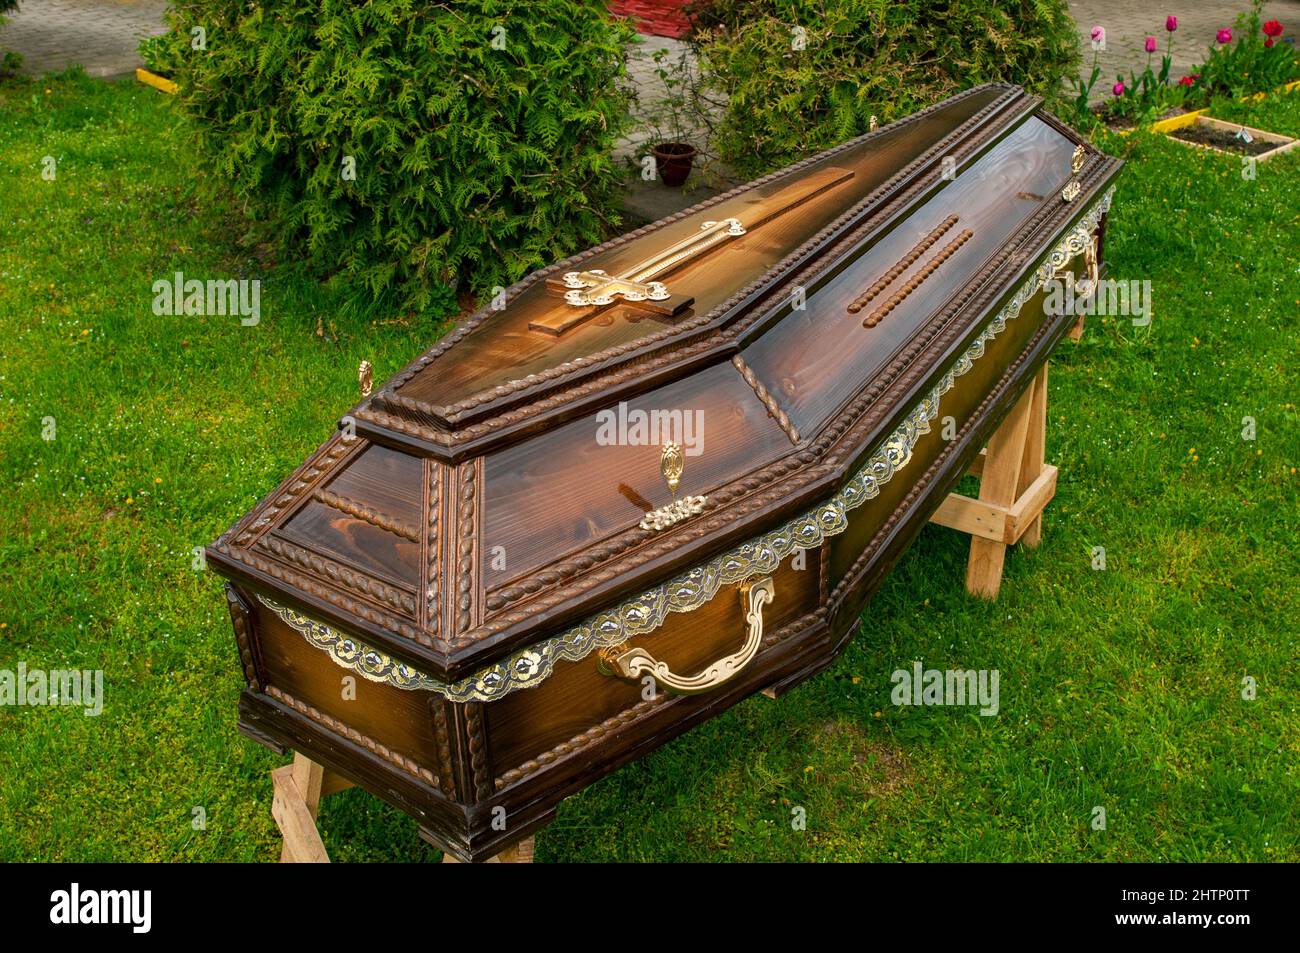 Wooden tomb, cross decoration, ornament, massive handles for burial Stock Photo